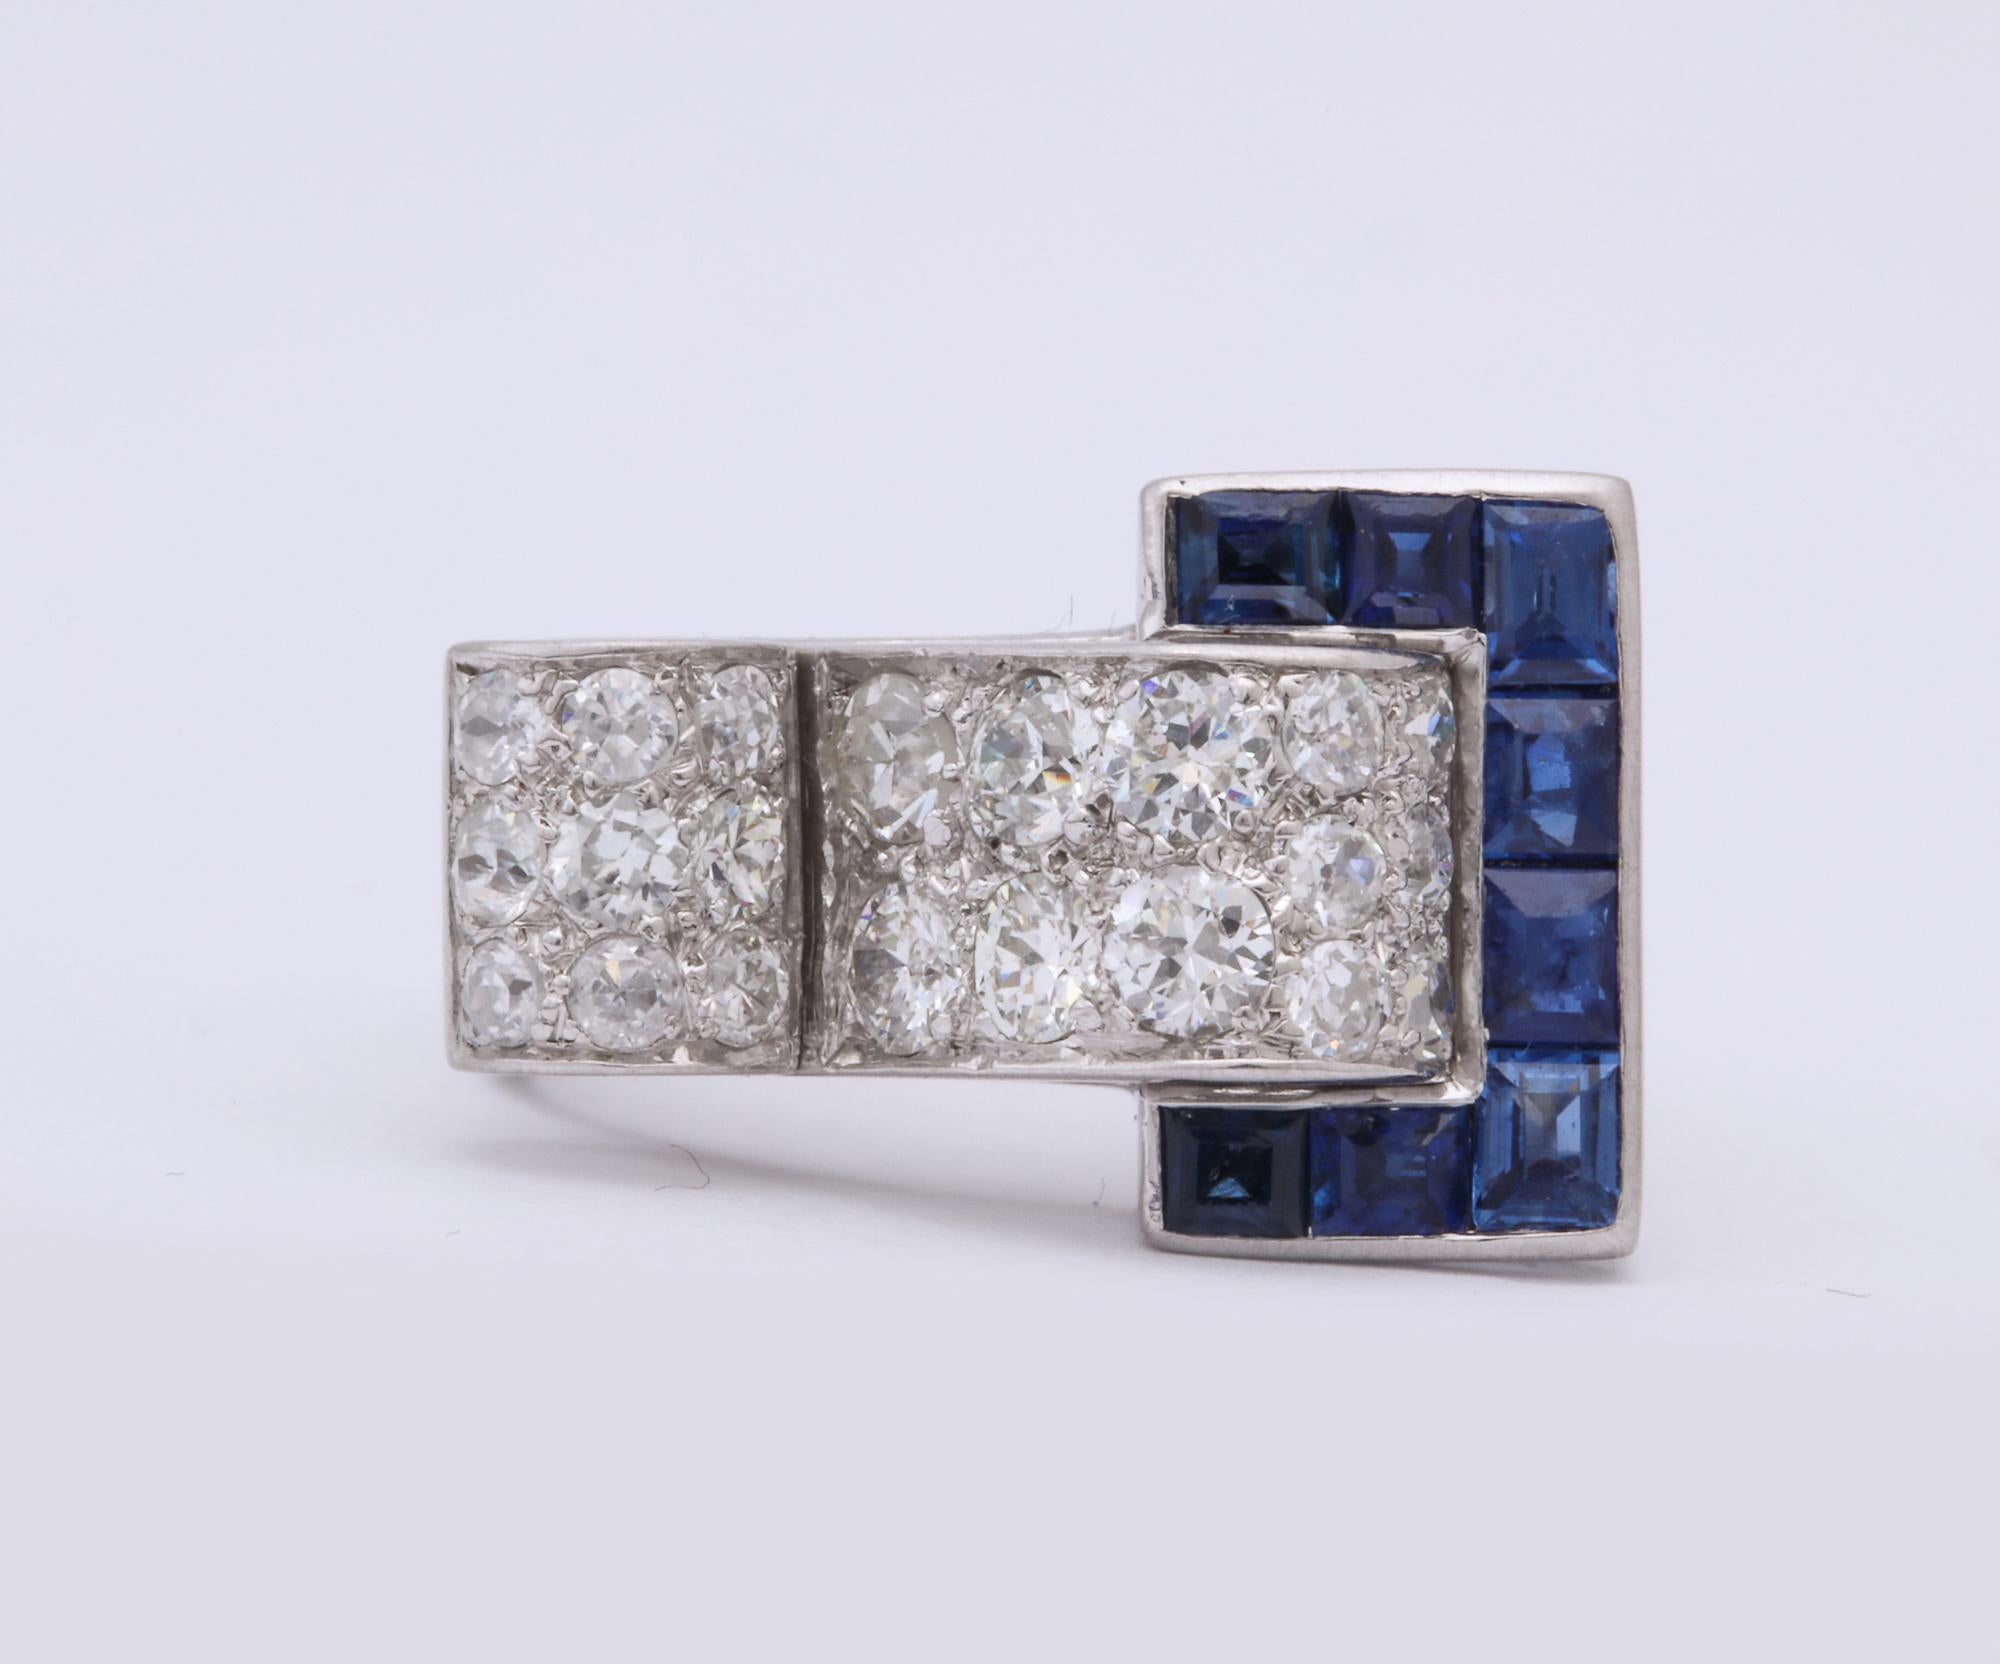 One Ladies High Style Buckle Design Platinum Ring Embellished With Eight Custom Cut Beautiful Color Calibre Cut Sapphires Weighing Approximately .75 Cts. This Geometric Ring Is Also Embellished With Numerous Old Cut Antique Cut Diamonds Weighing